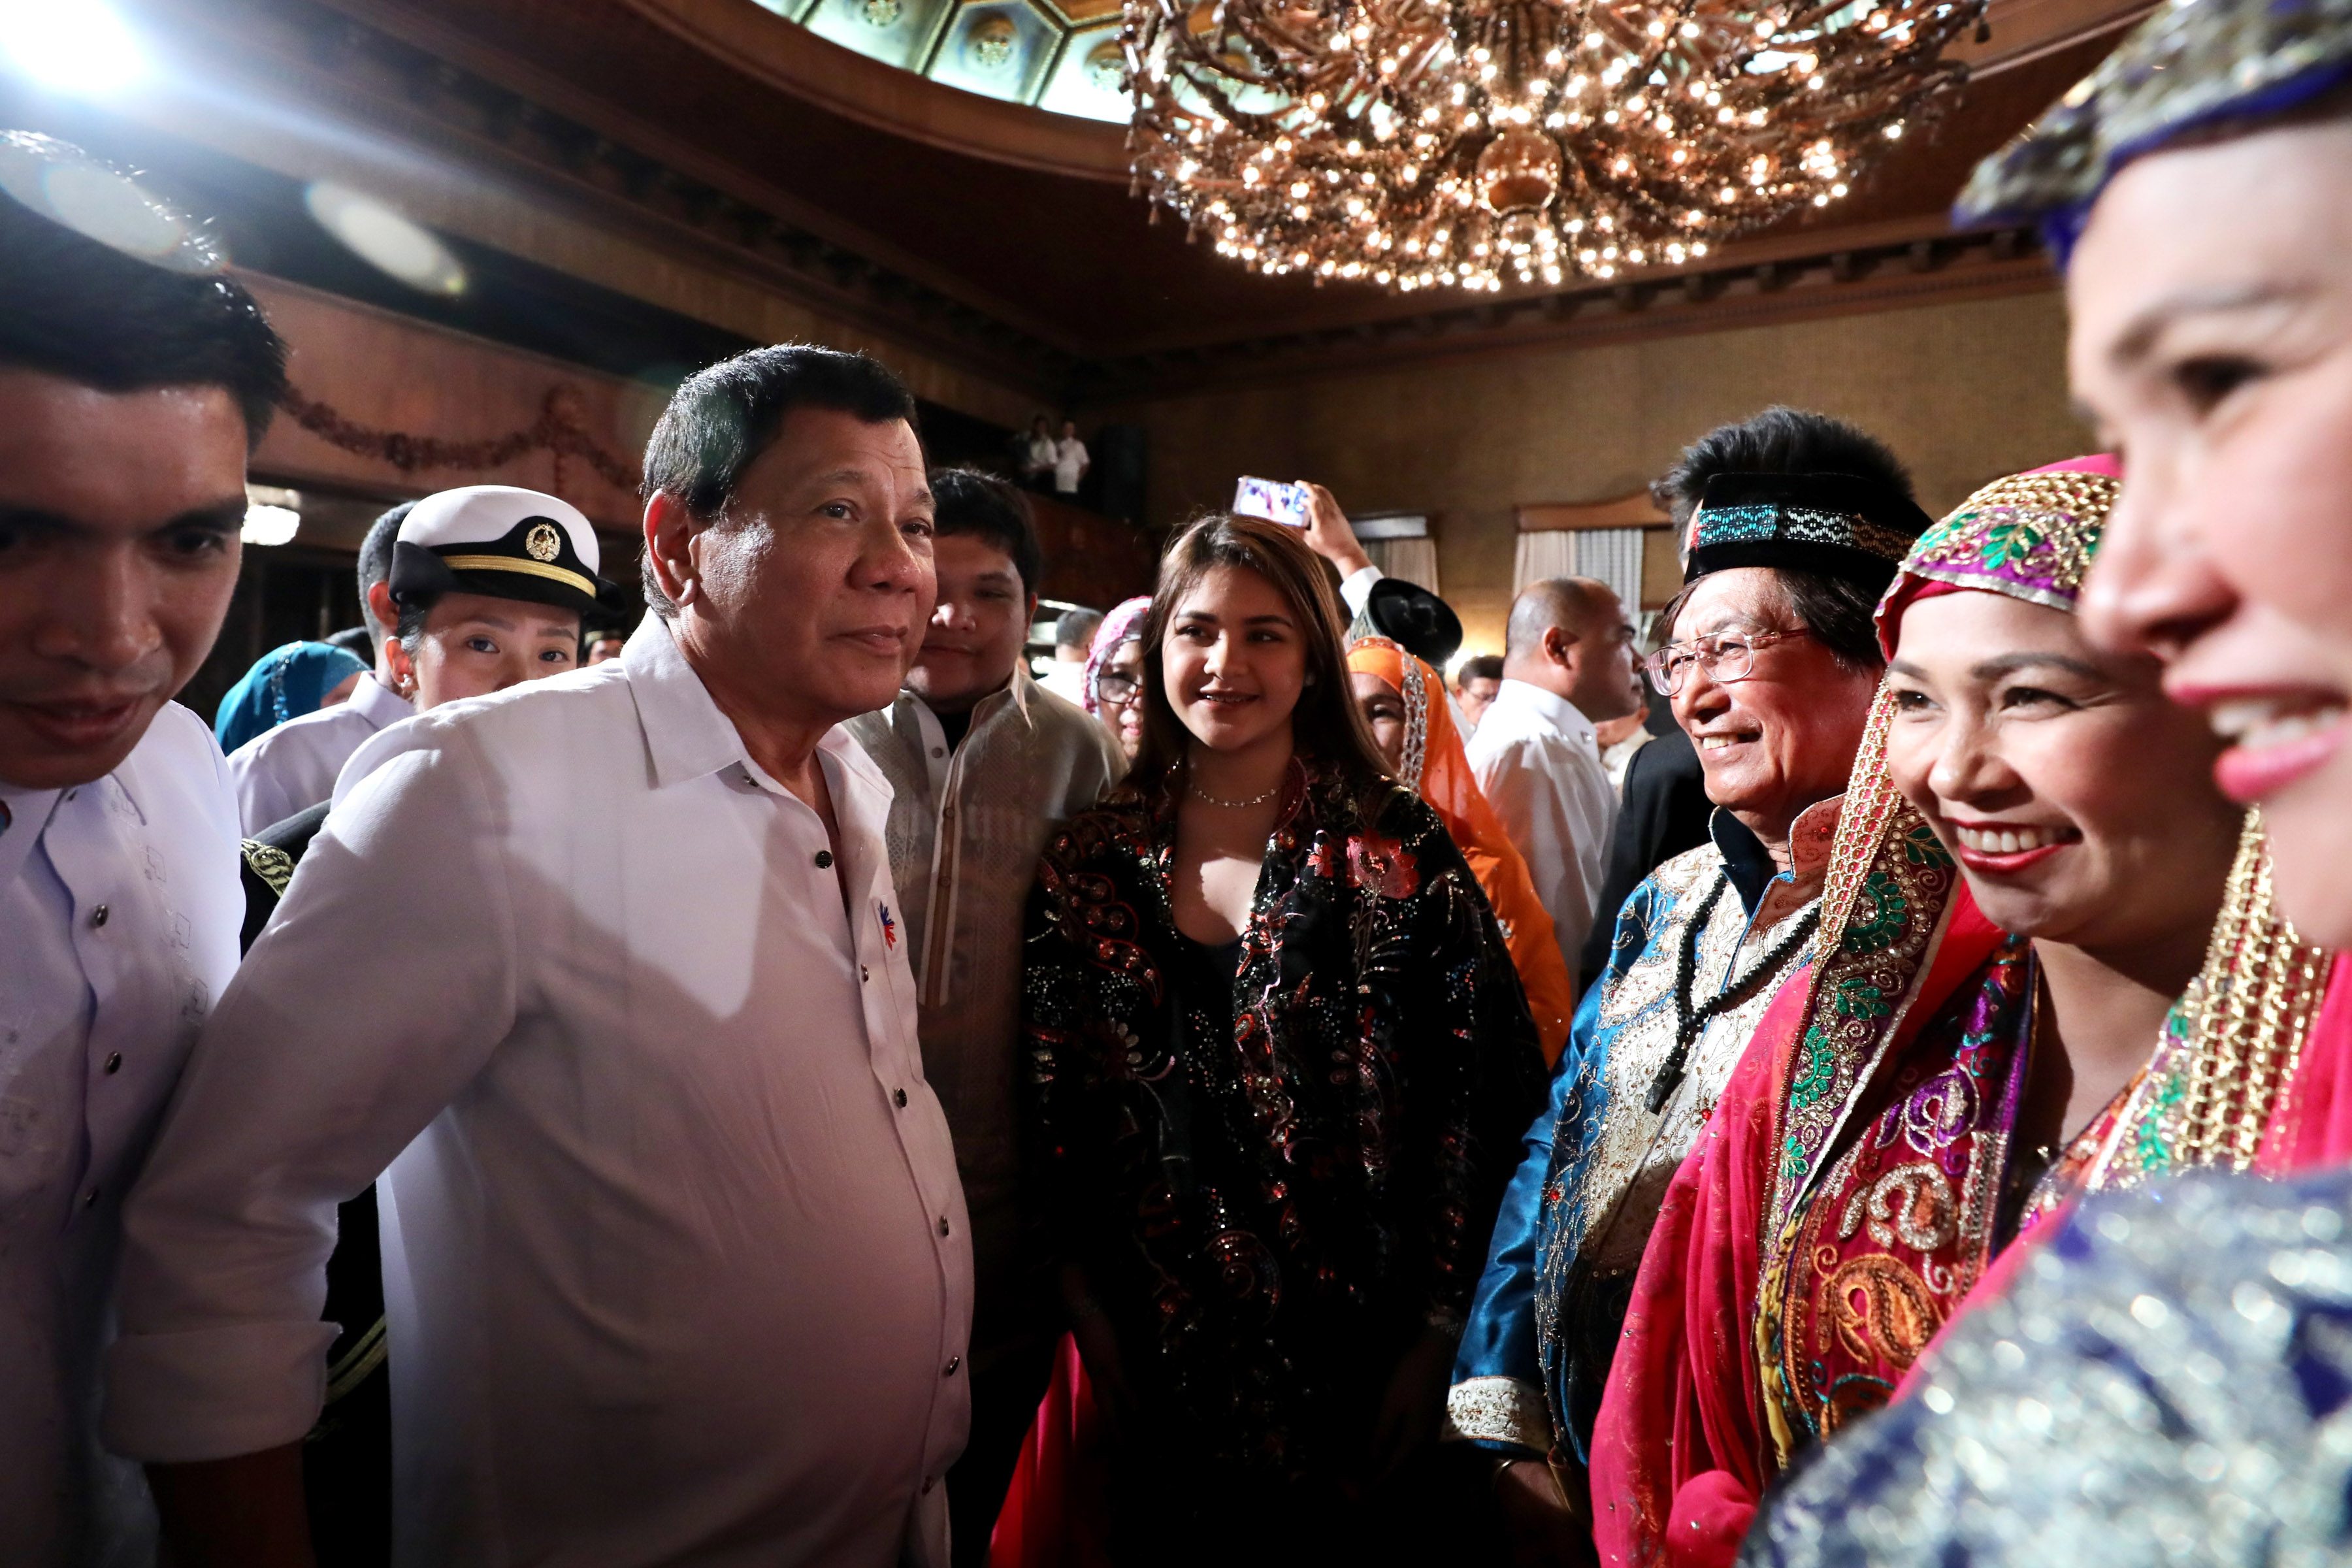 PALACE GUEST. President Duterte's grandchildren Isabelle (middle) and Omar attend the Eid'l Fitr celebration in Malacañang with their mother Lovelie Sangkola Sumera (foreground, in blue). Presidential photo  